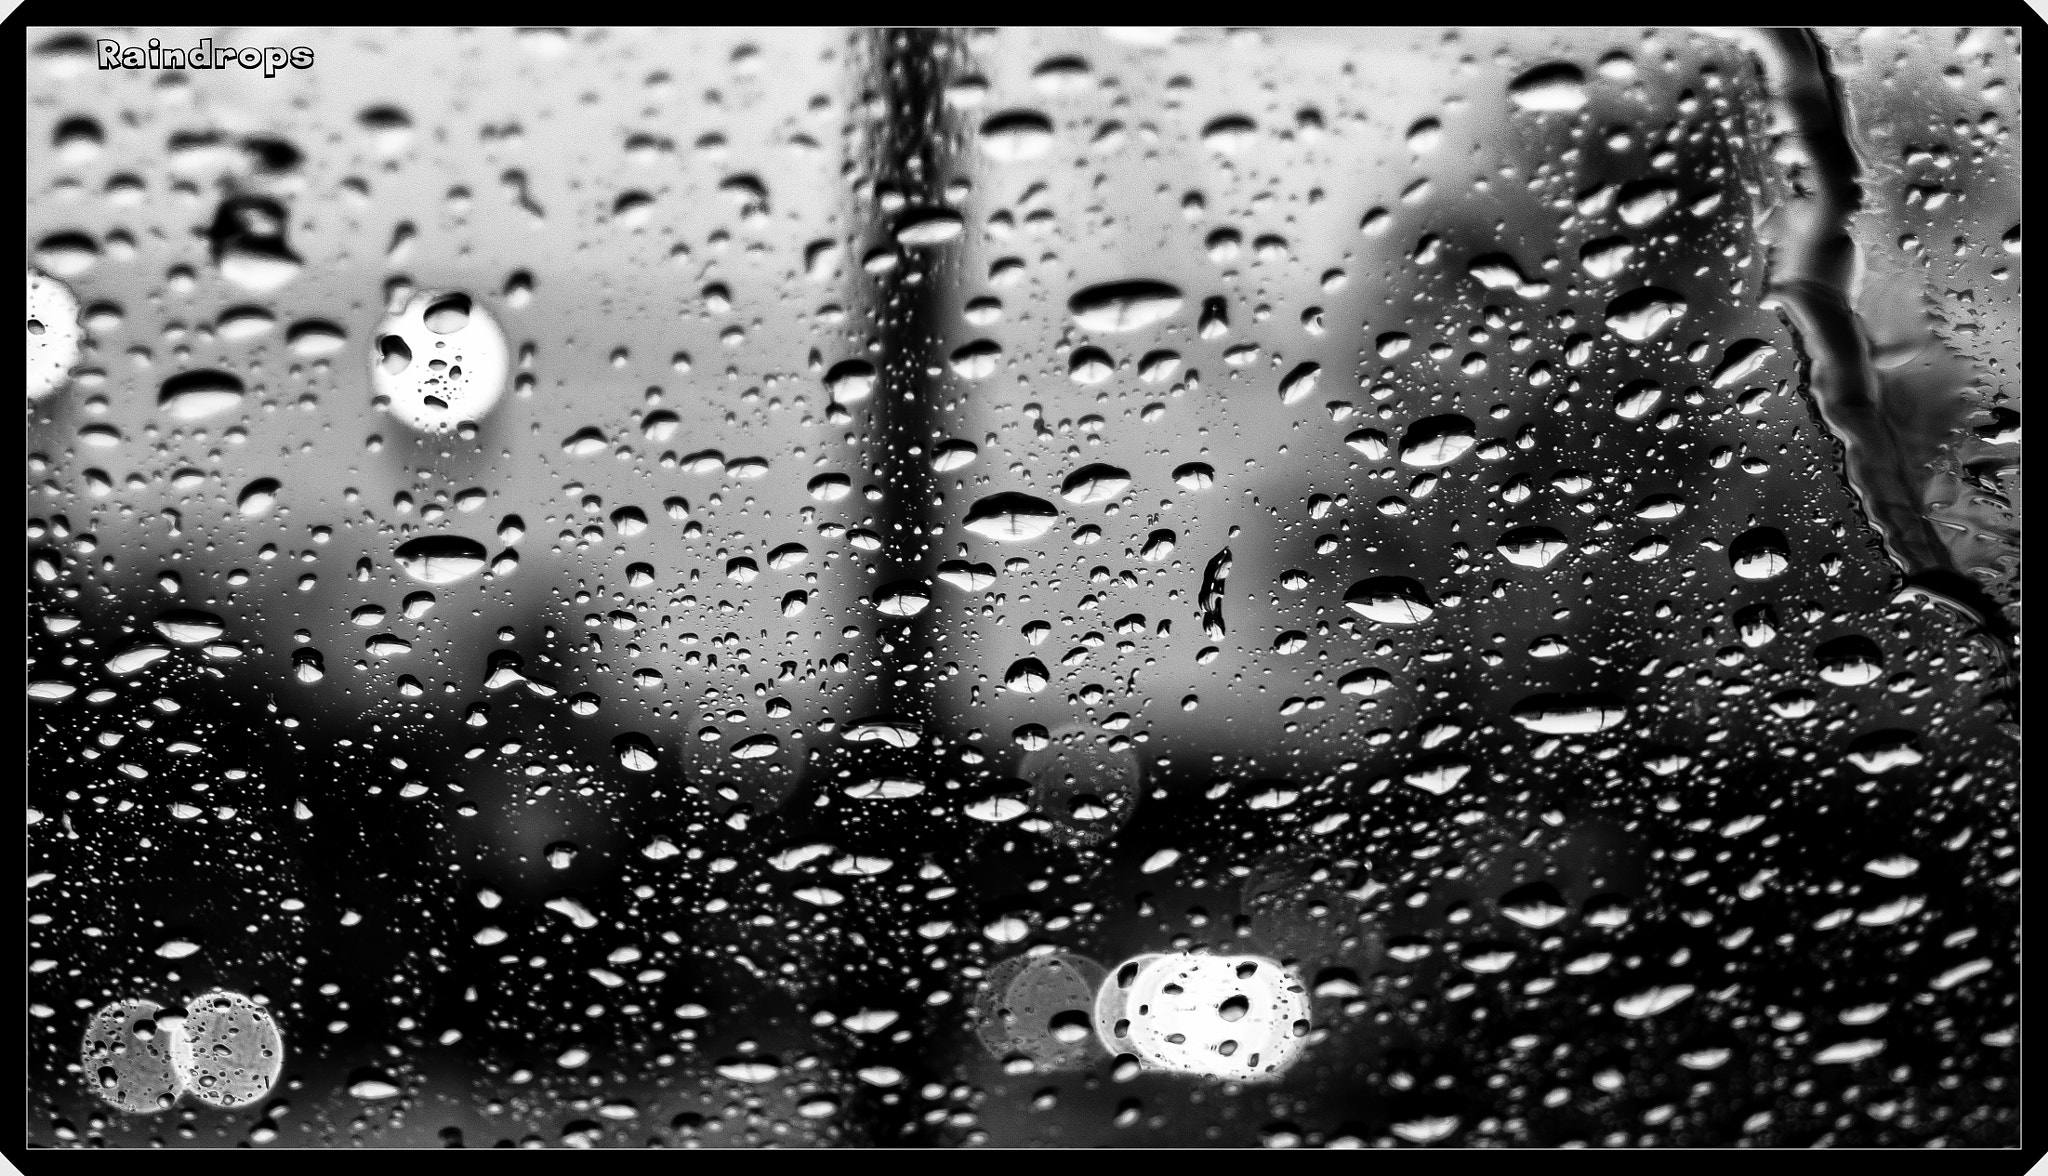 Pentax K-x sample photo. Raindrops on my windshield in wallingford, ct. iso 320 photography